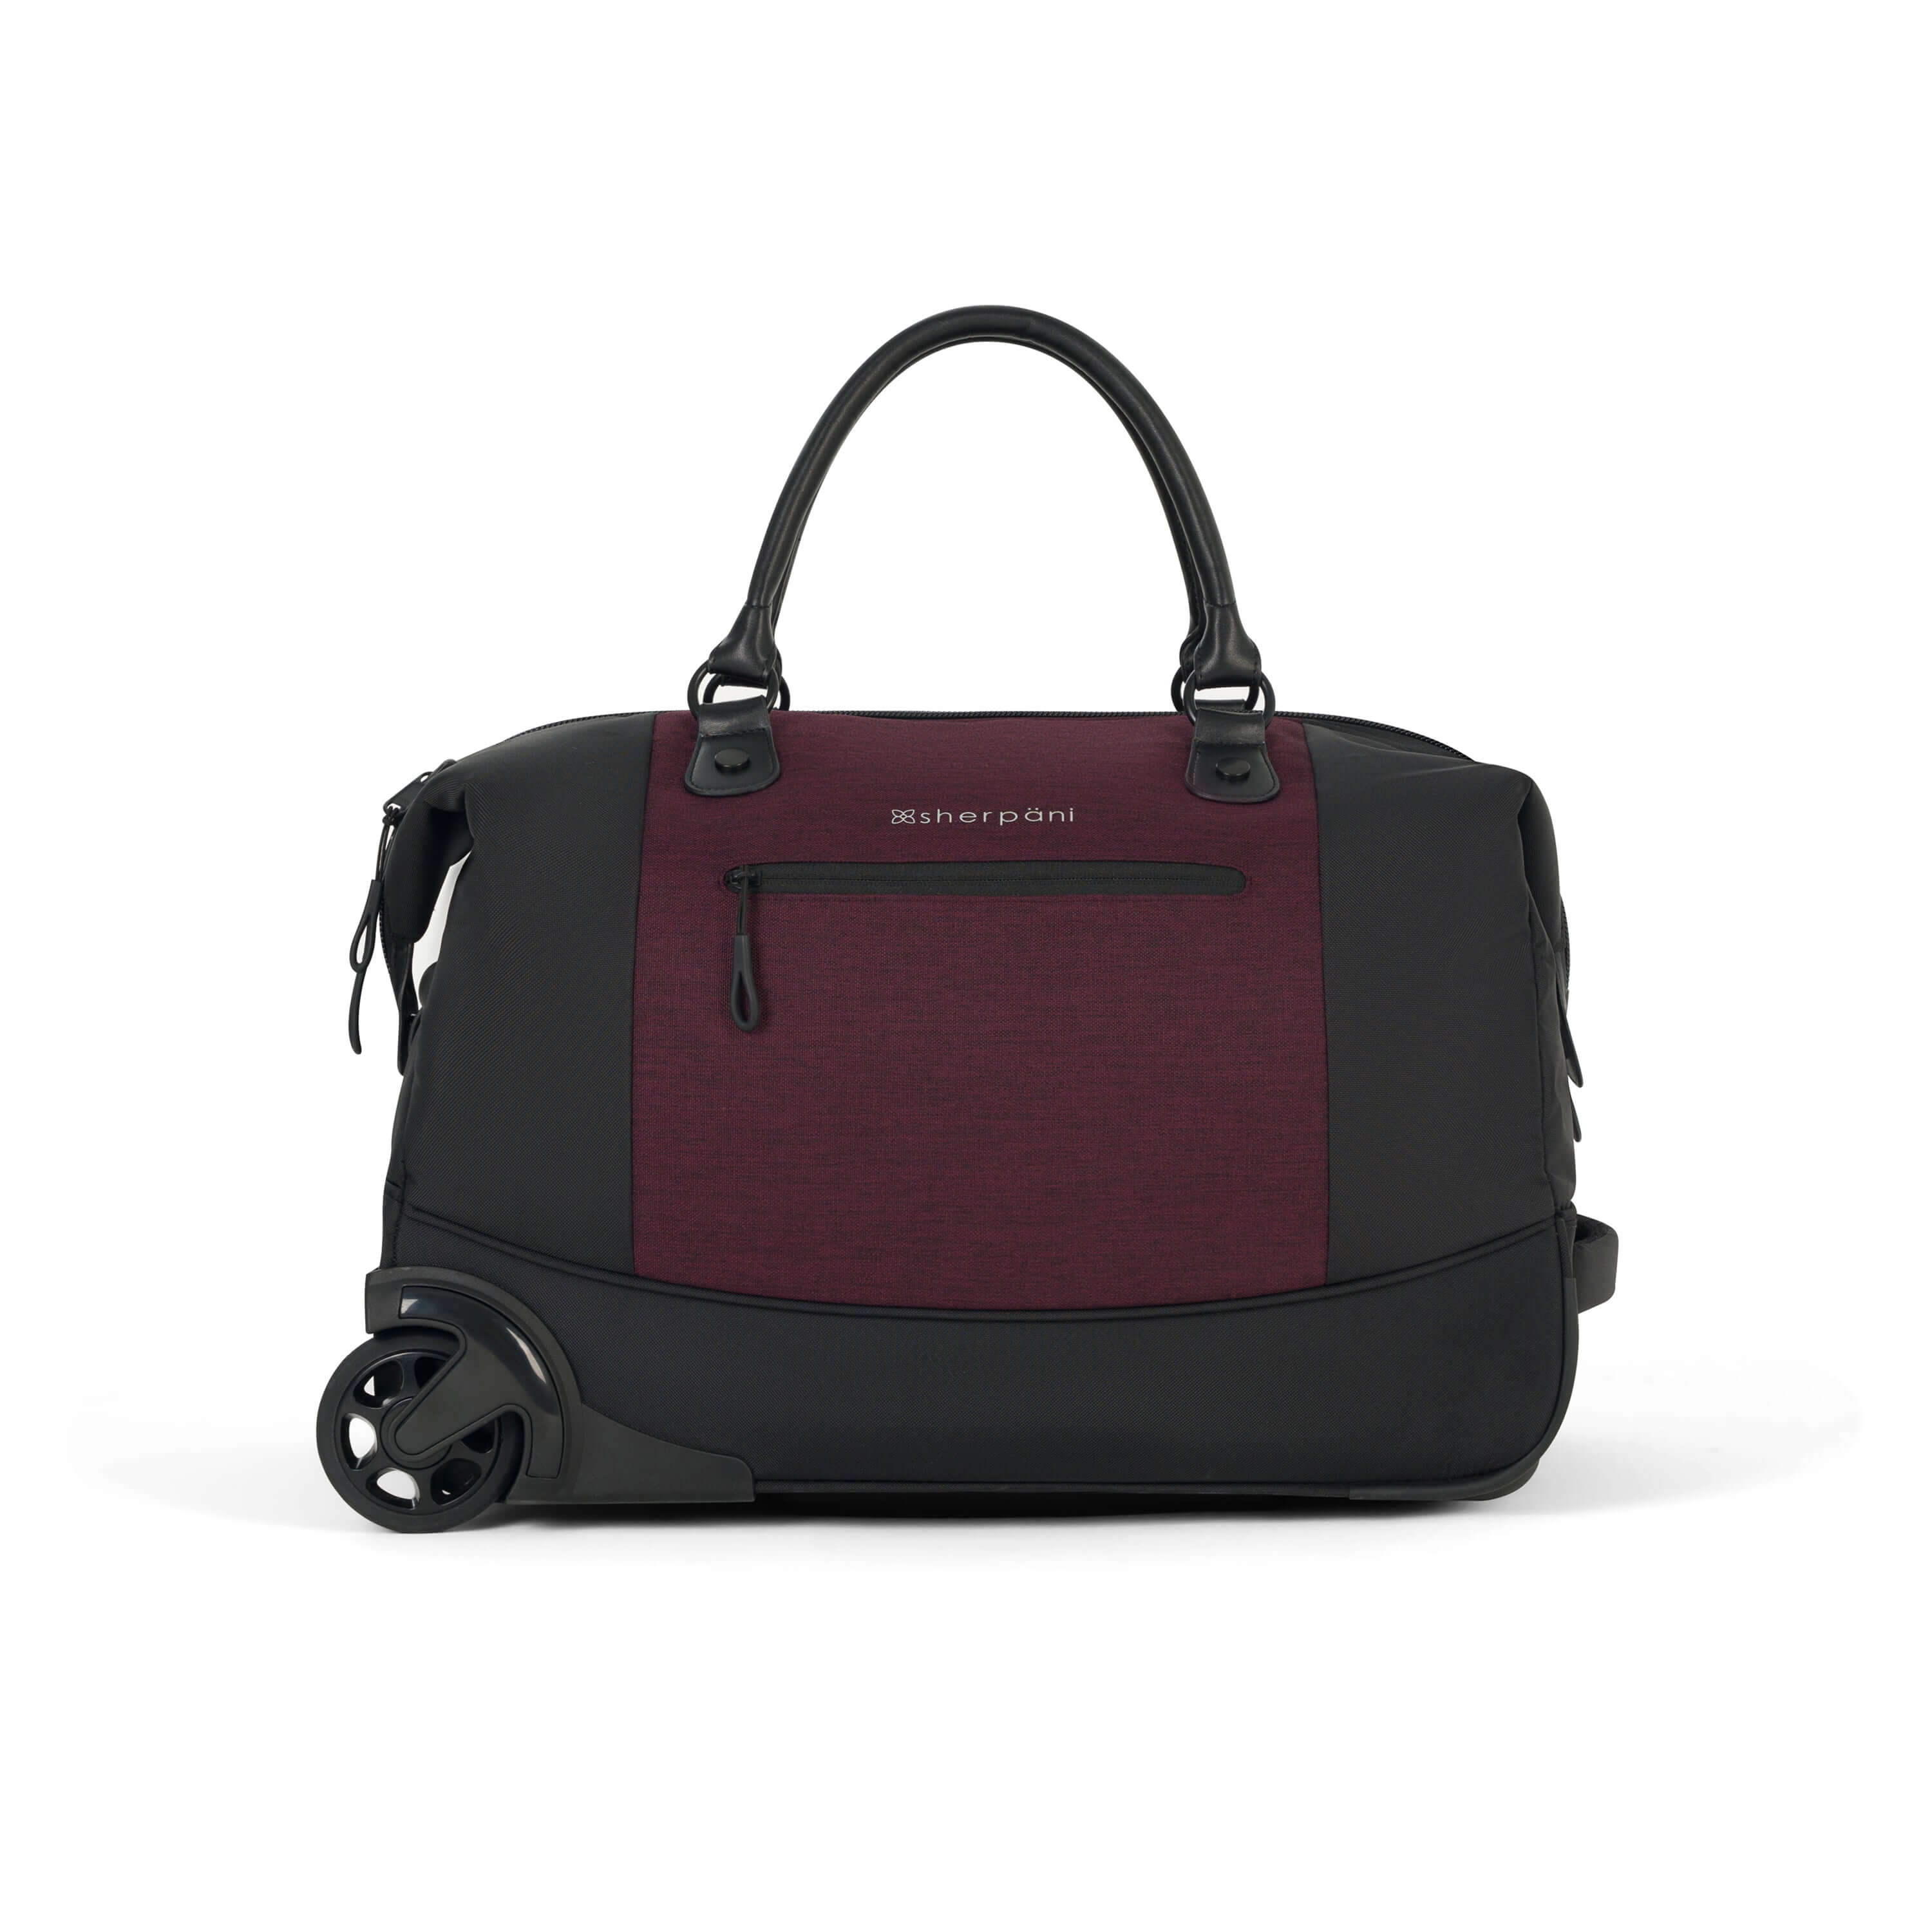 Flat back view of Sherpani’s Anti Theft rolling Duffle, the Trip in Merlot, with vegan leather accents in black.  The bag lies flat on the ground with a retractable luggage handle hidden on the right side and the rolling wheels shown on the left side. The bag features short tote handles at the top and an external zipper compartment on the back panel.